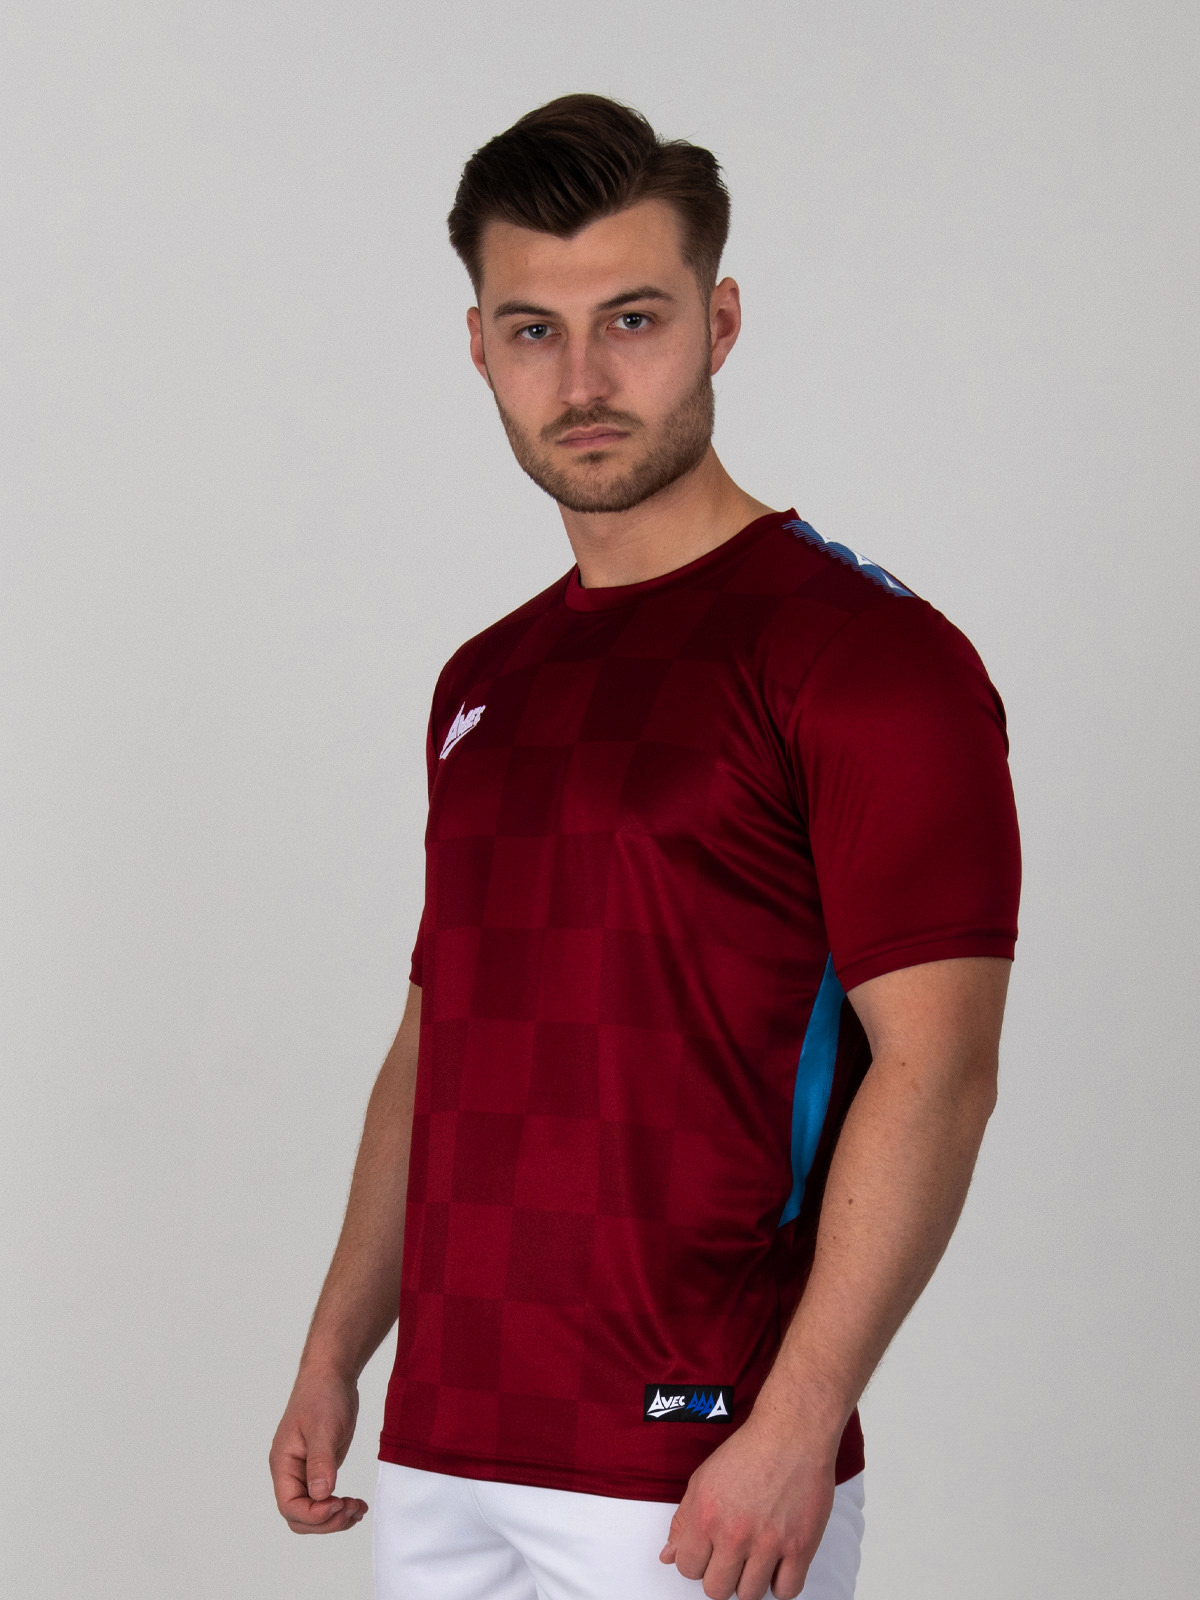 man is wearing a chequered claret football shirt with claret trim